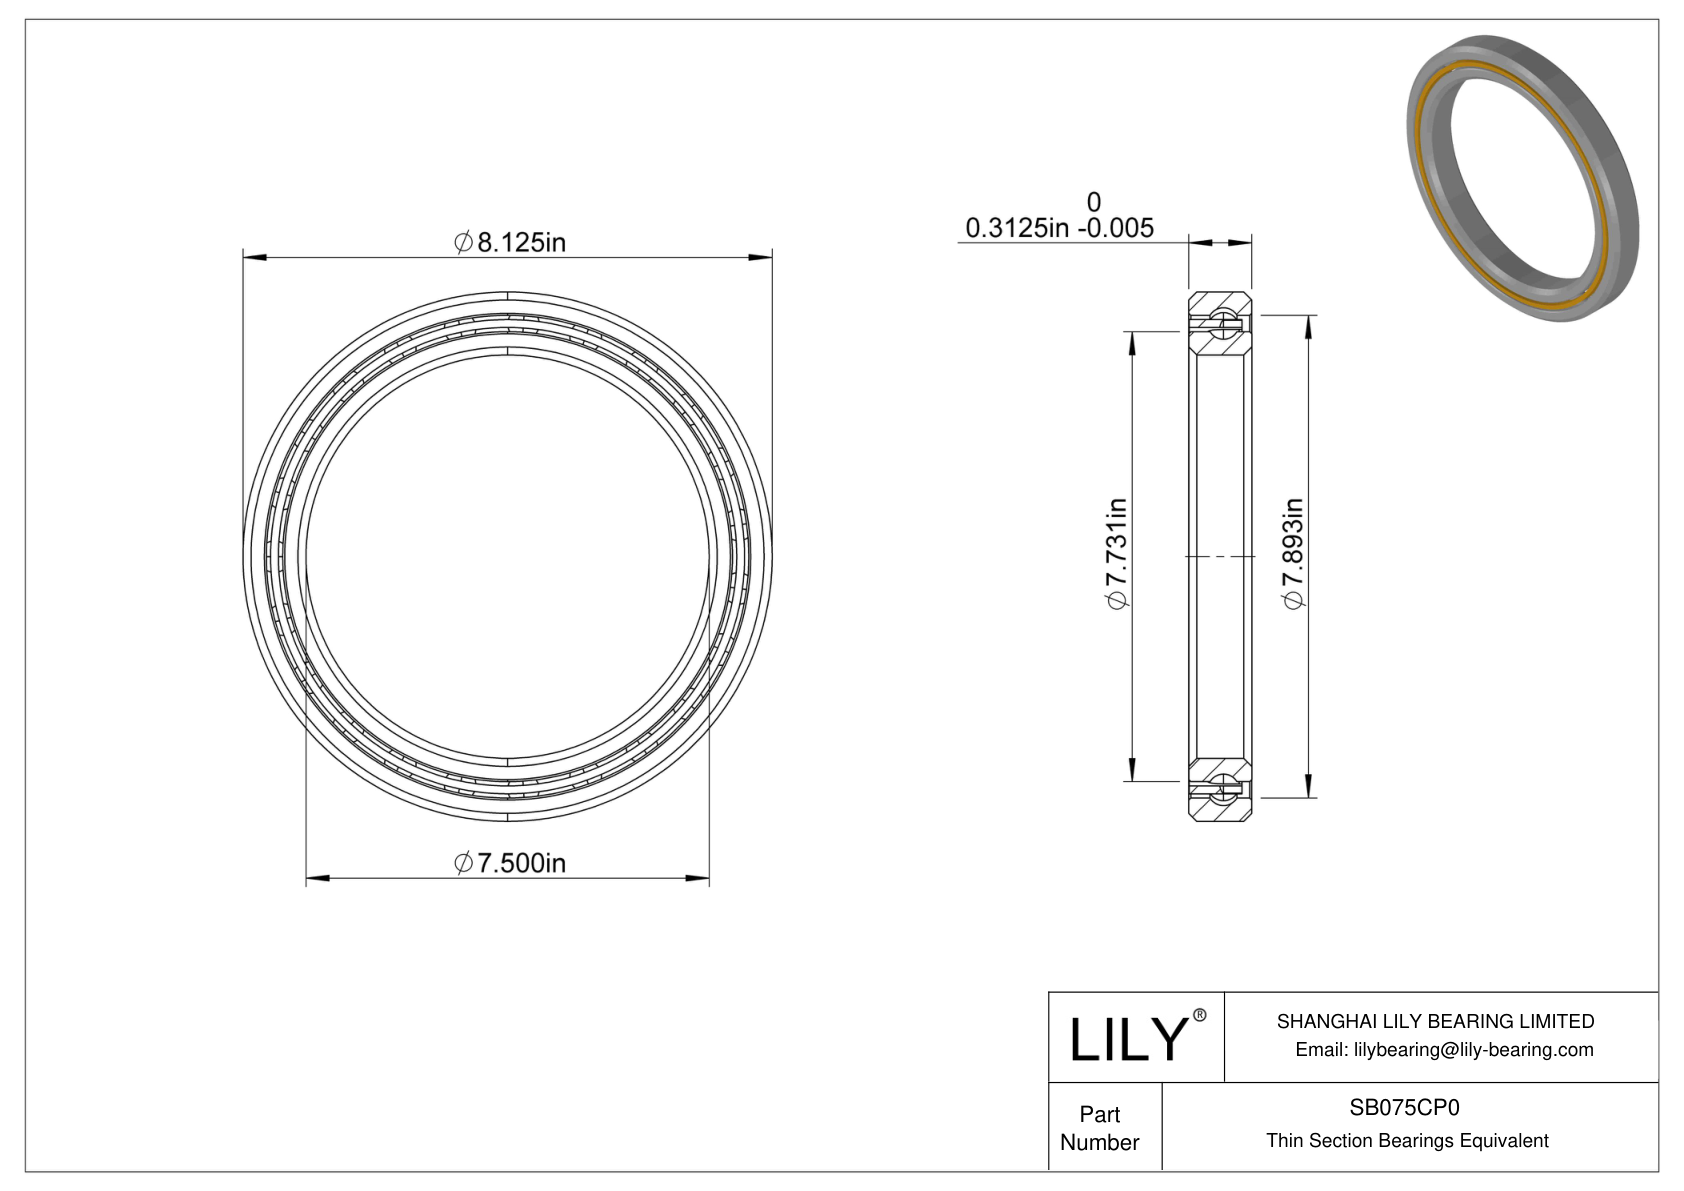 SB075CP0 Constant Section (CS) Bearings cad drawing